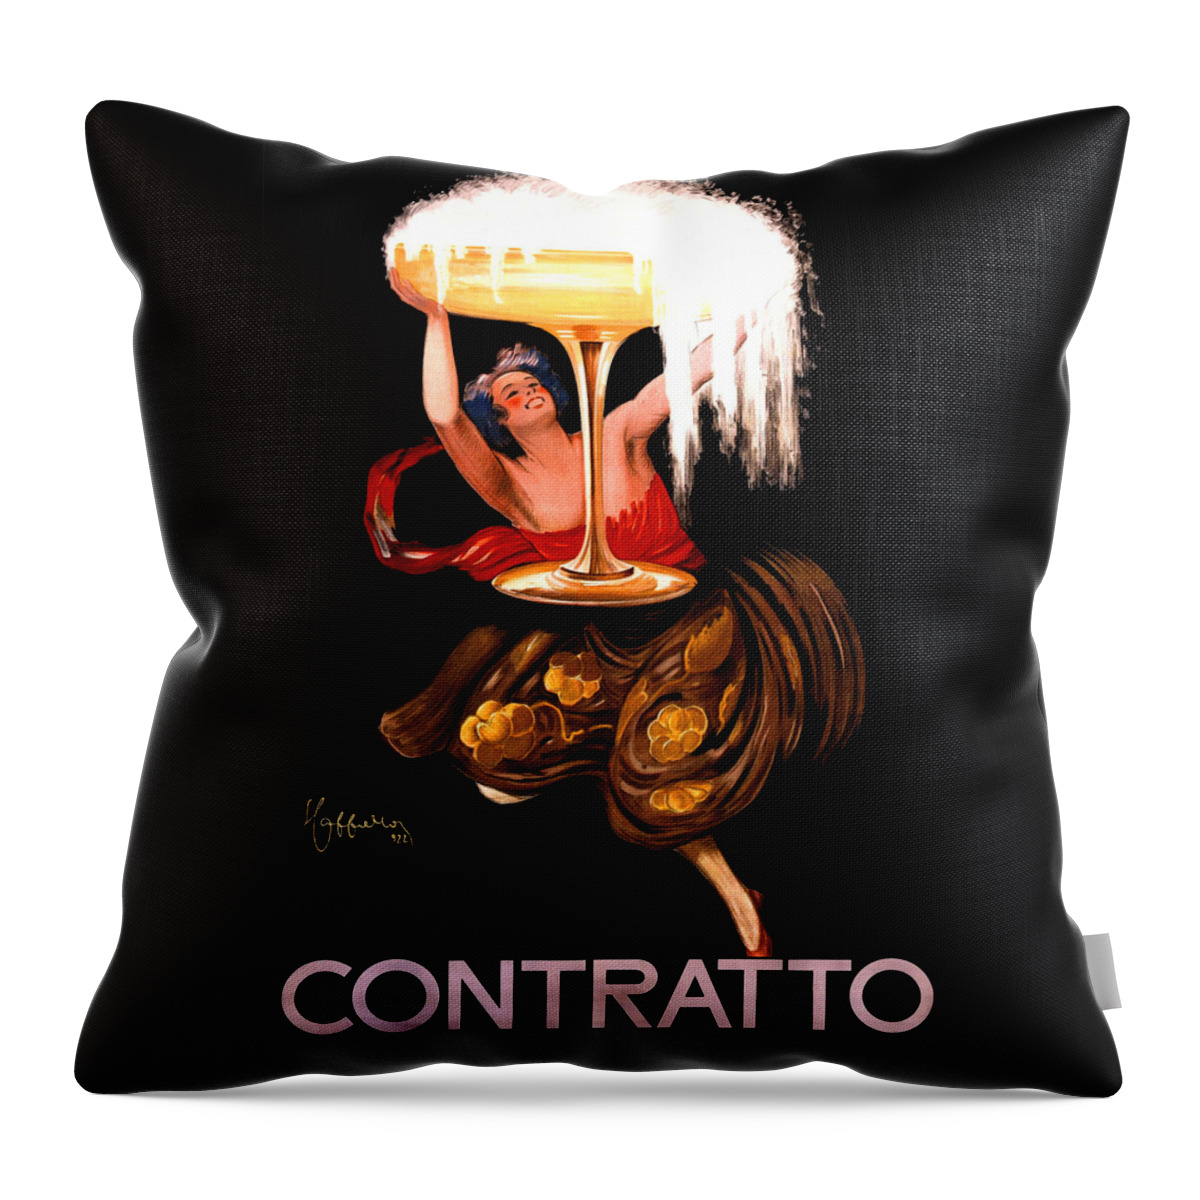 Contratto Throw Pillow featuring the painting Contratto Advertising Poster by Leonetto Cappiello